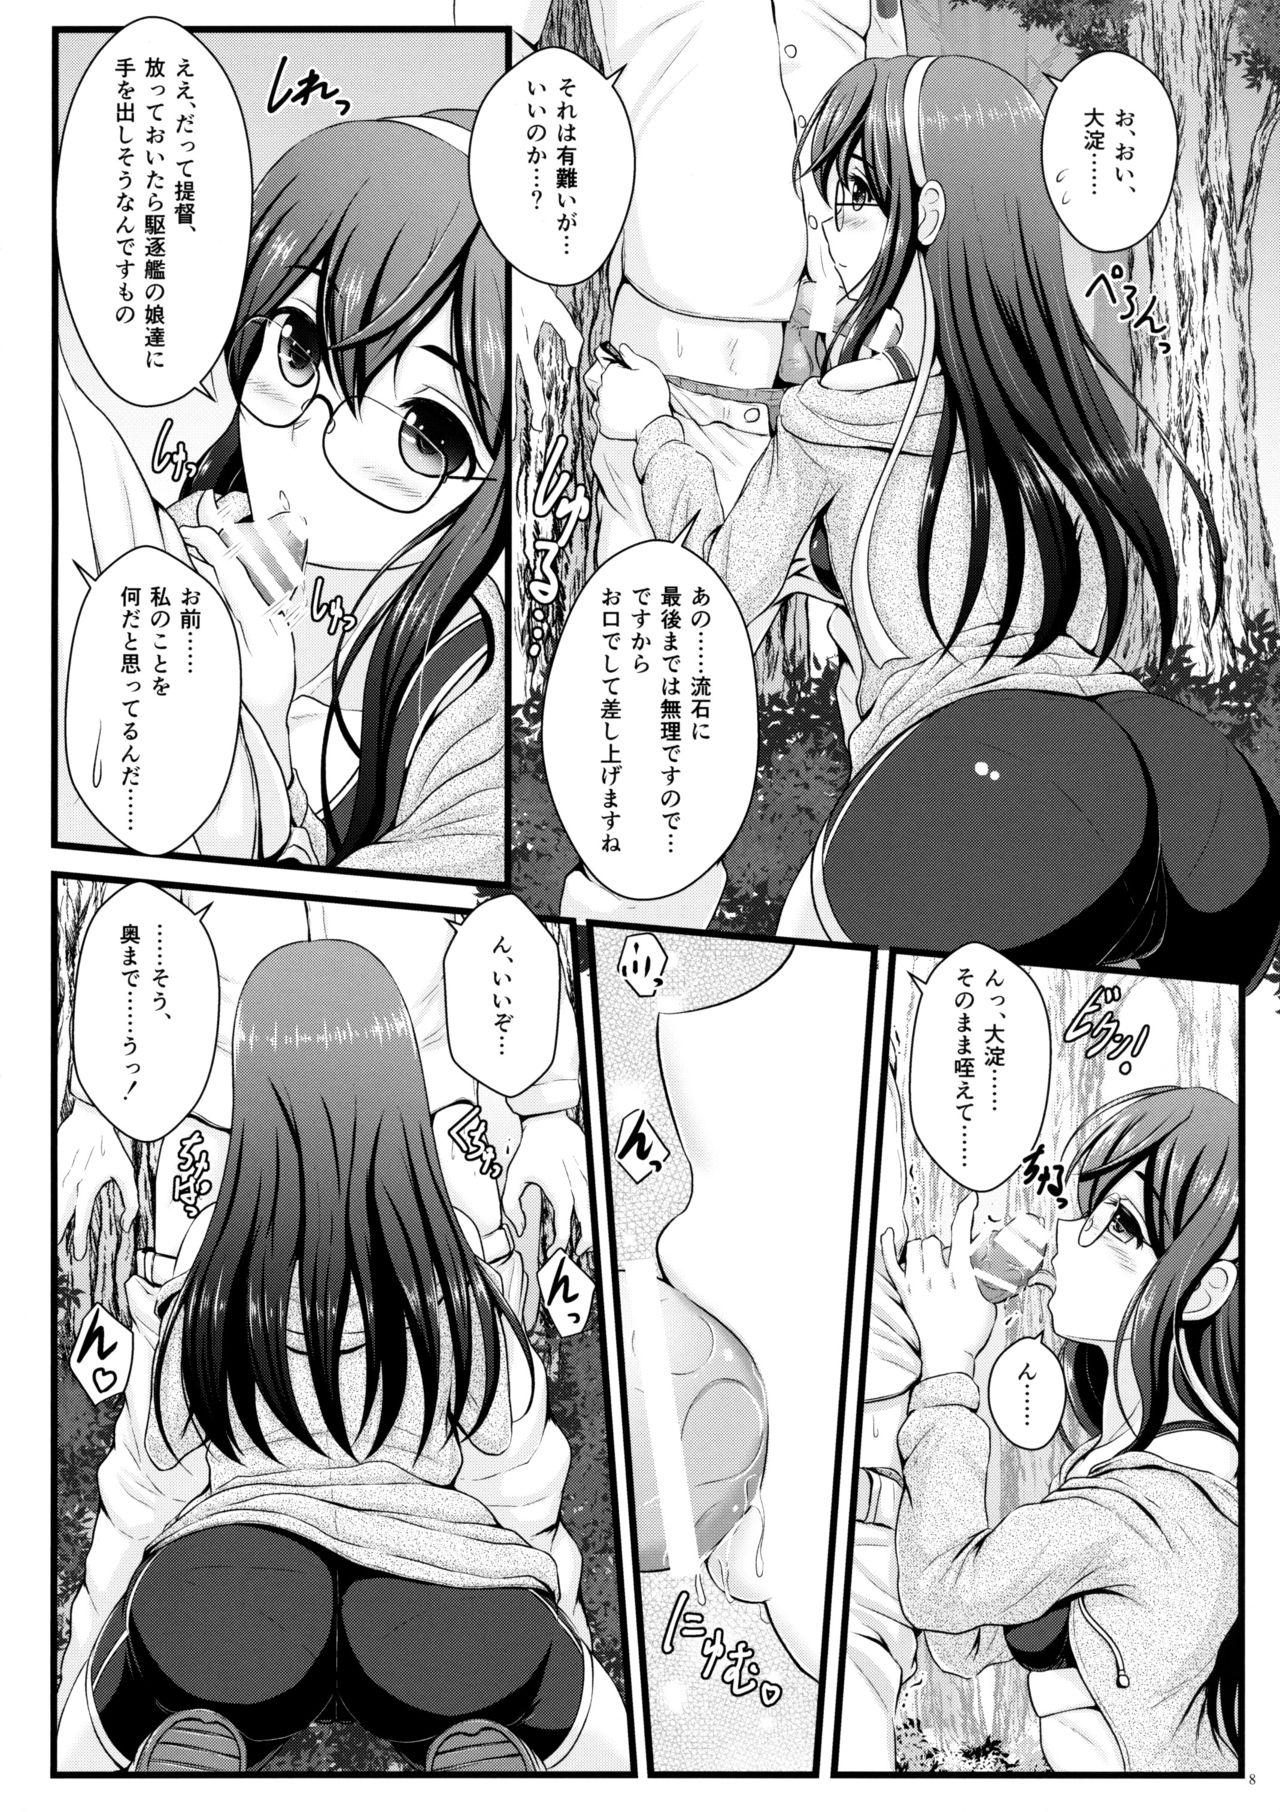 Lez Hardcore Private Training - Kantai collection Actress - Page 7